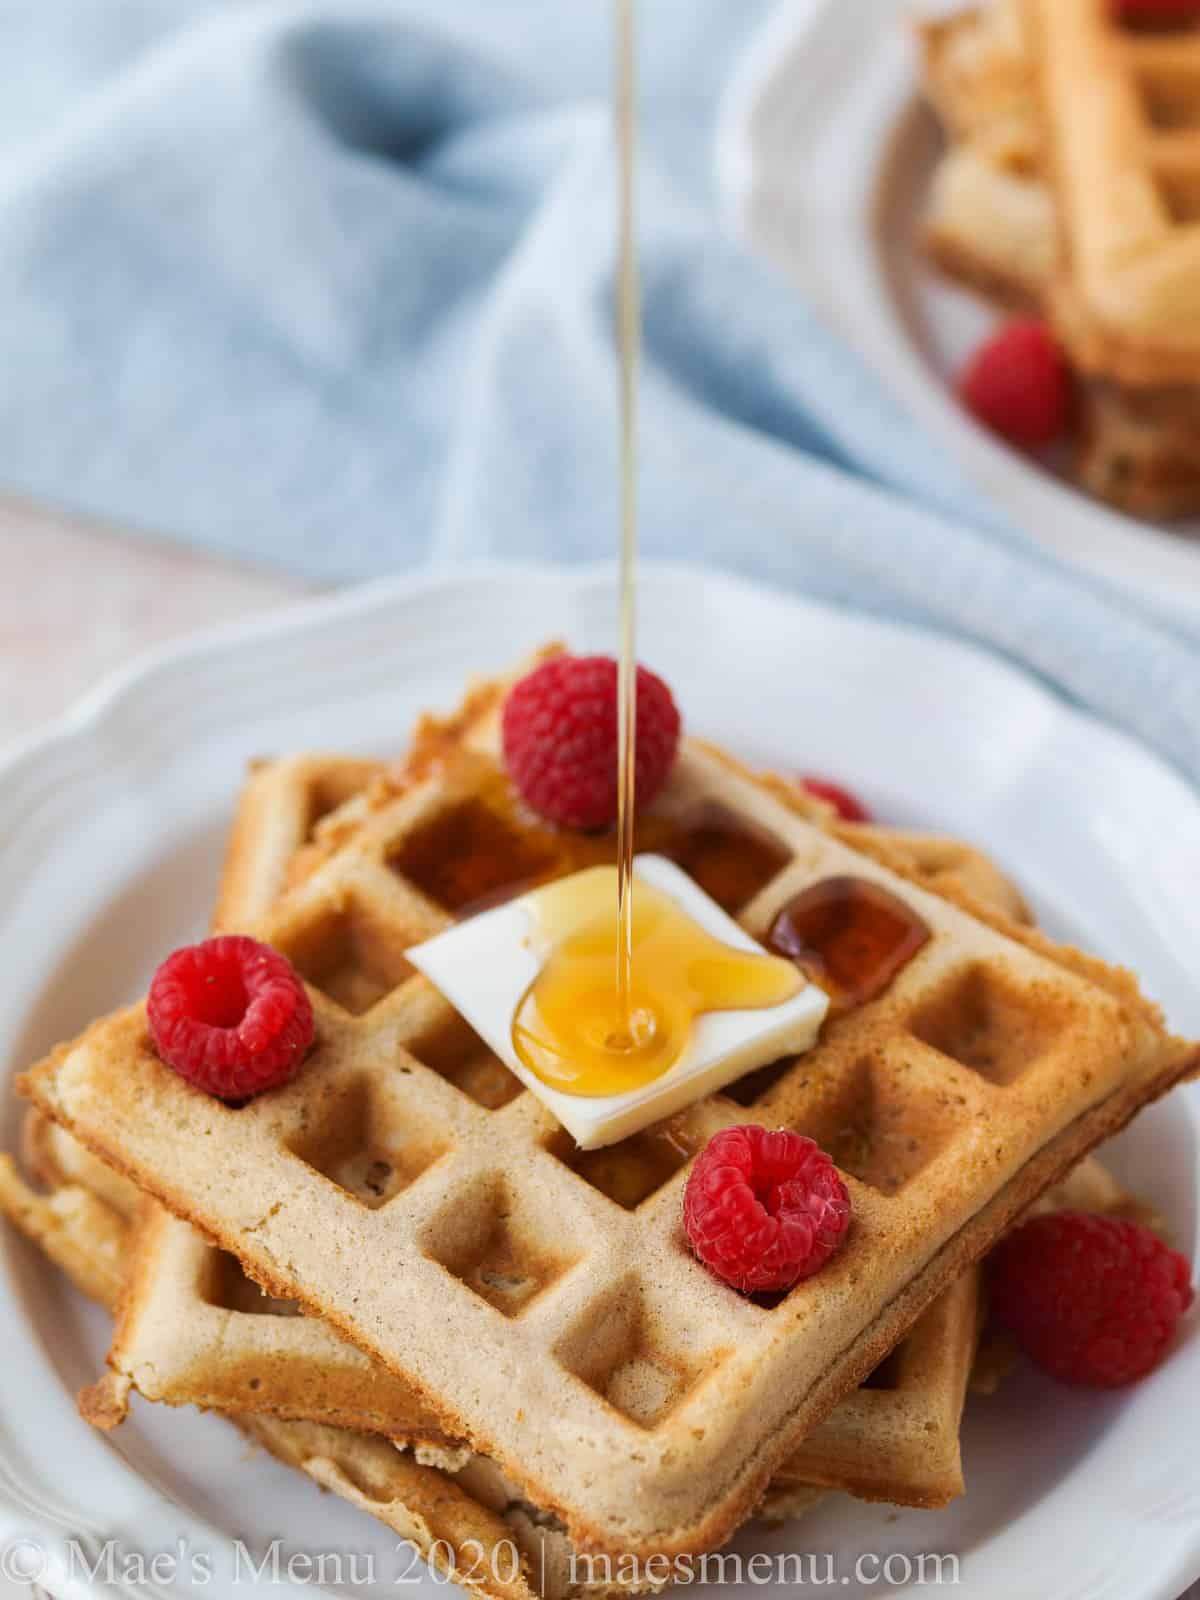 Syrup pouring over fluffy whole wheat belgian waffles.